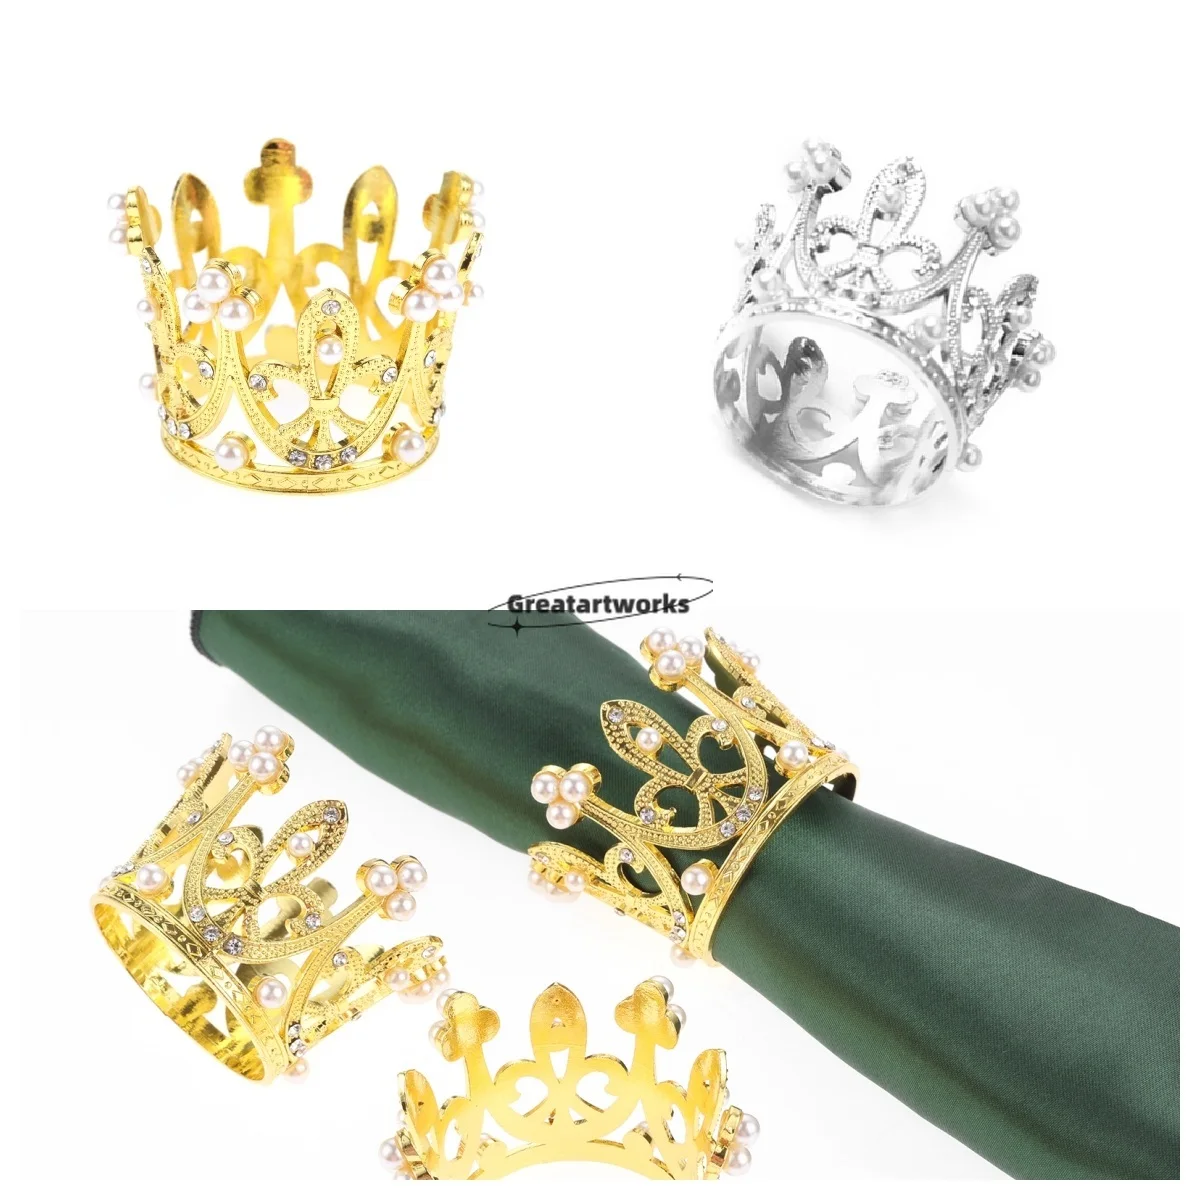 

12pcs/set Crown Shape Napkin Buckles Luxurious Pearls Rhinestones Decor Dinner Table Cloth Holder Rings Gold/Silver Party Feast